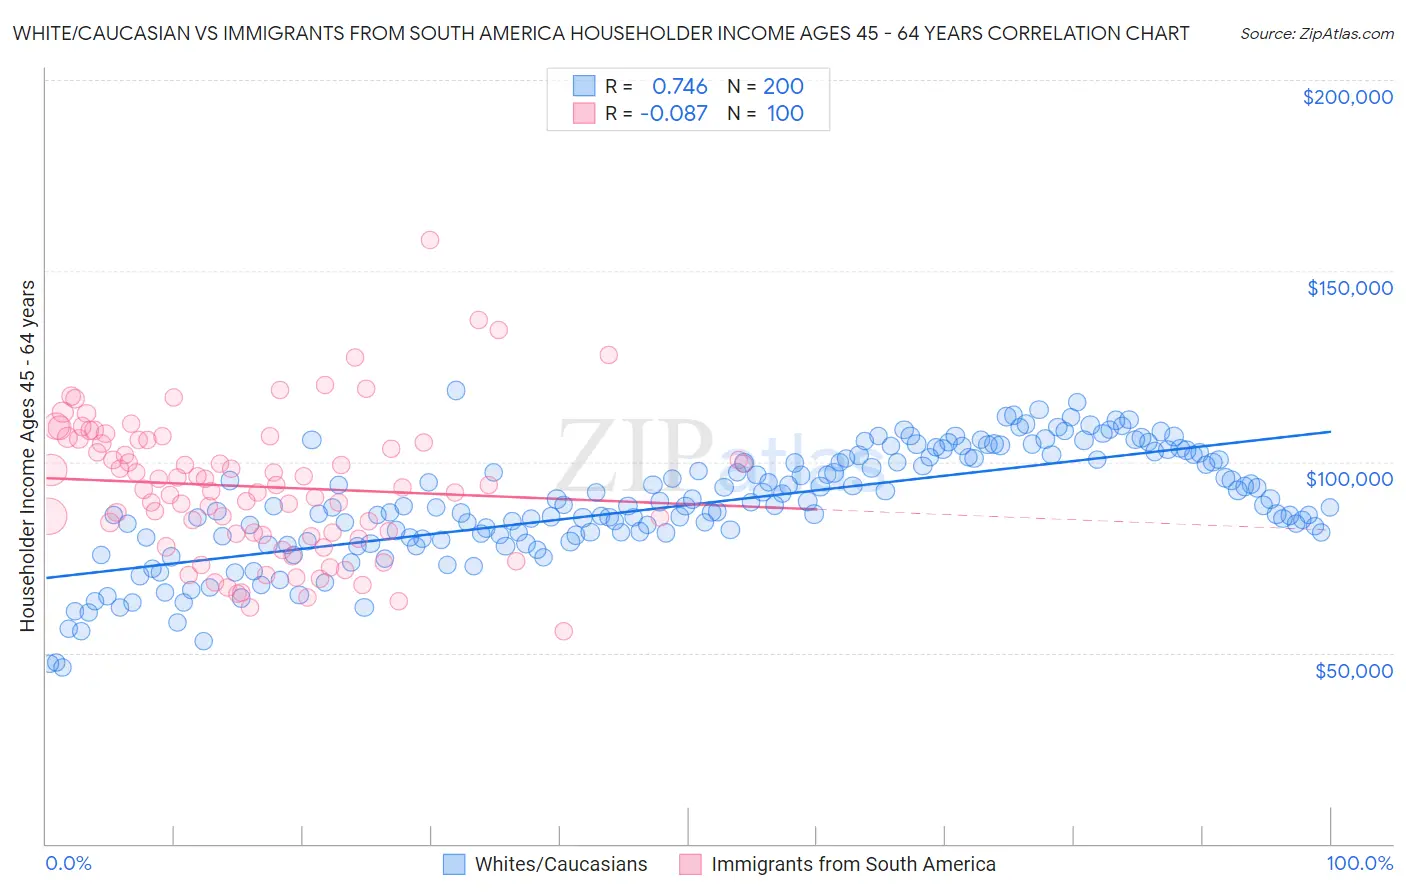 White/Caucasian vs Immigrants from South America Householder Income Ages 45 - 64 years